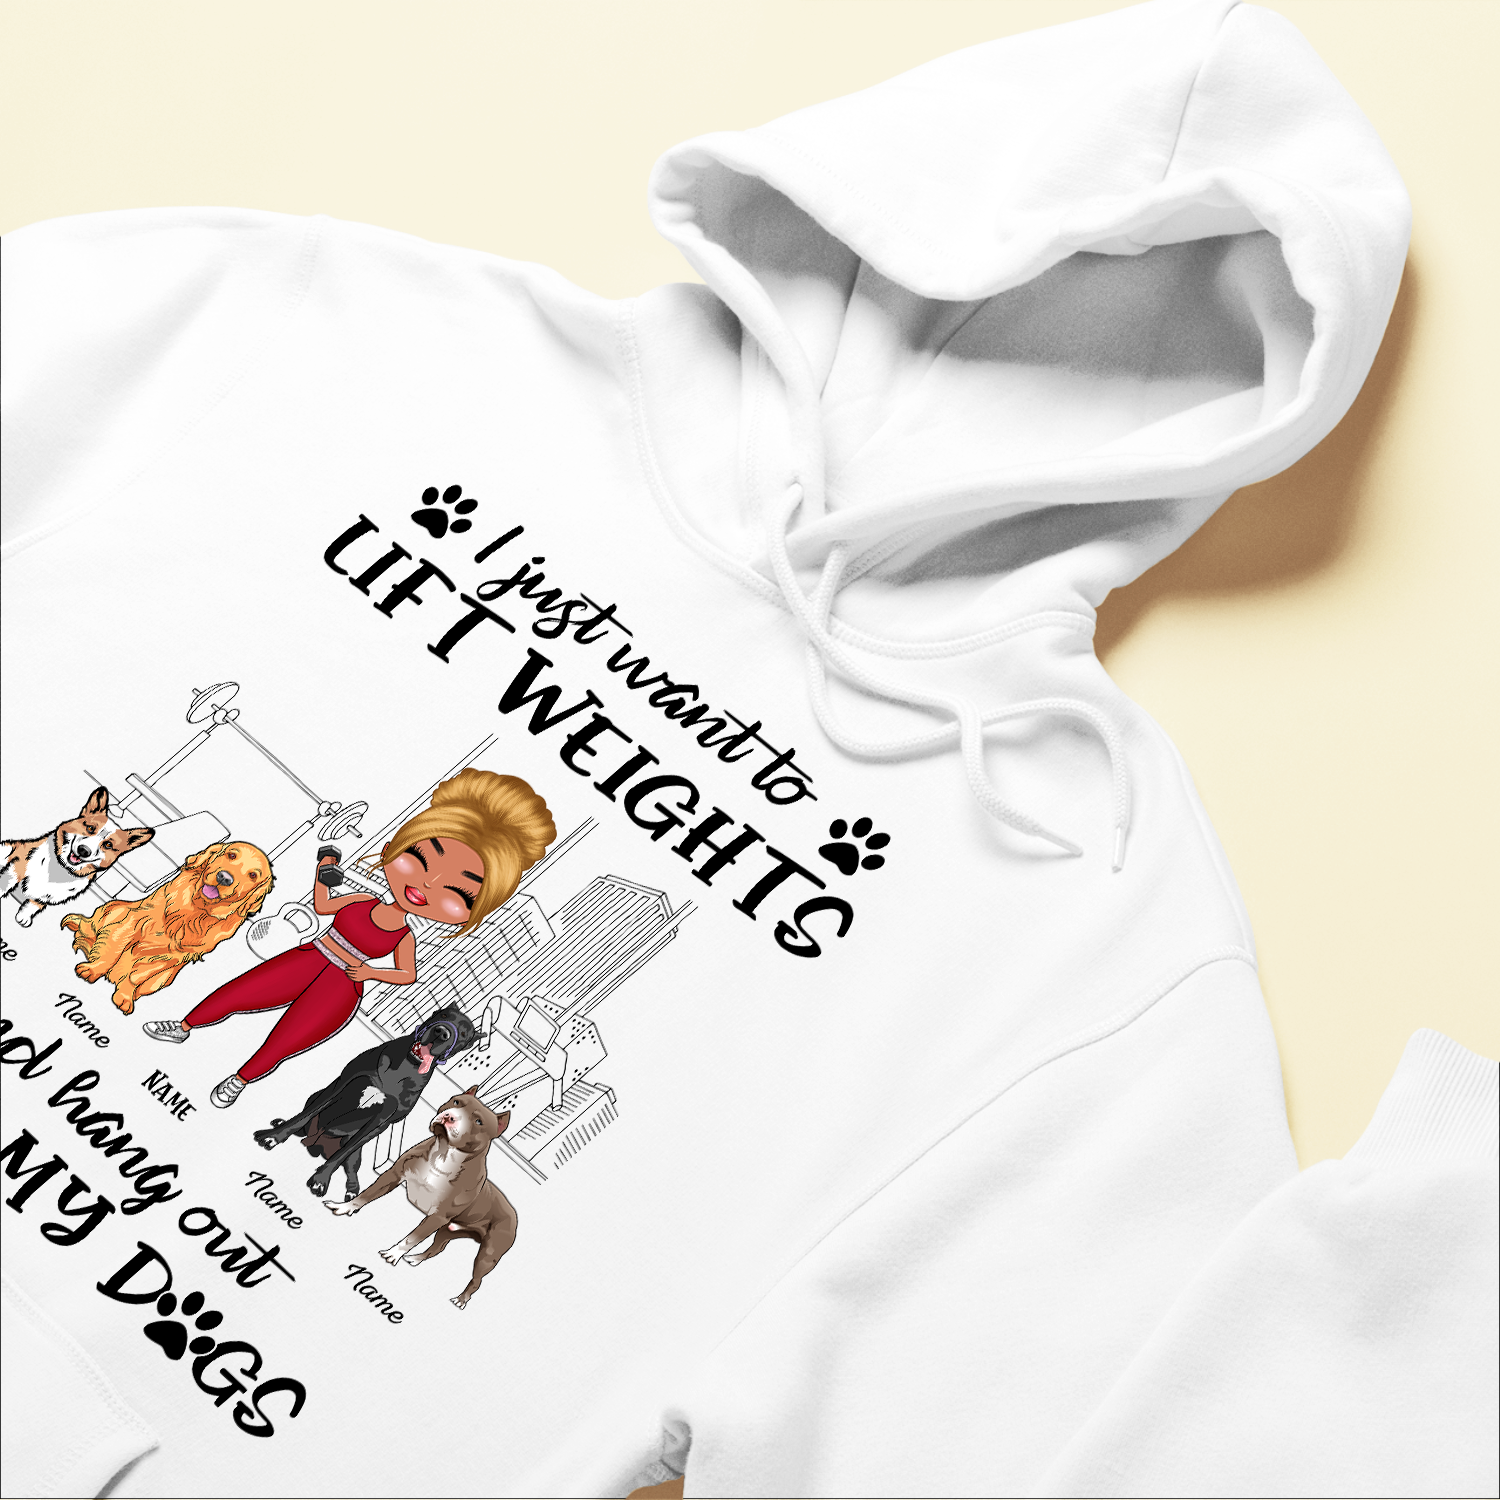 Hang Out With My Dogs - Personalized Shirt - Gift For Gymer - Chibi Fitness Girl